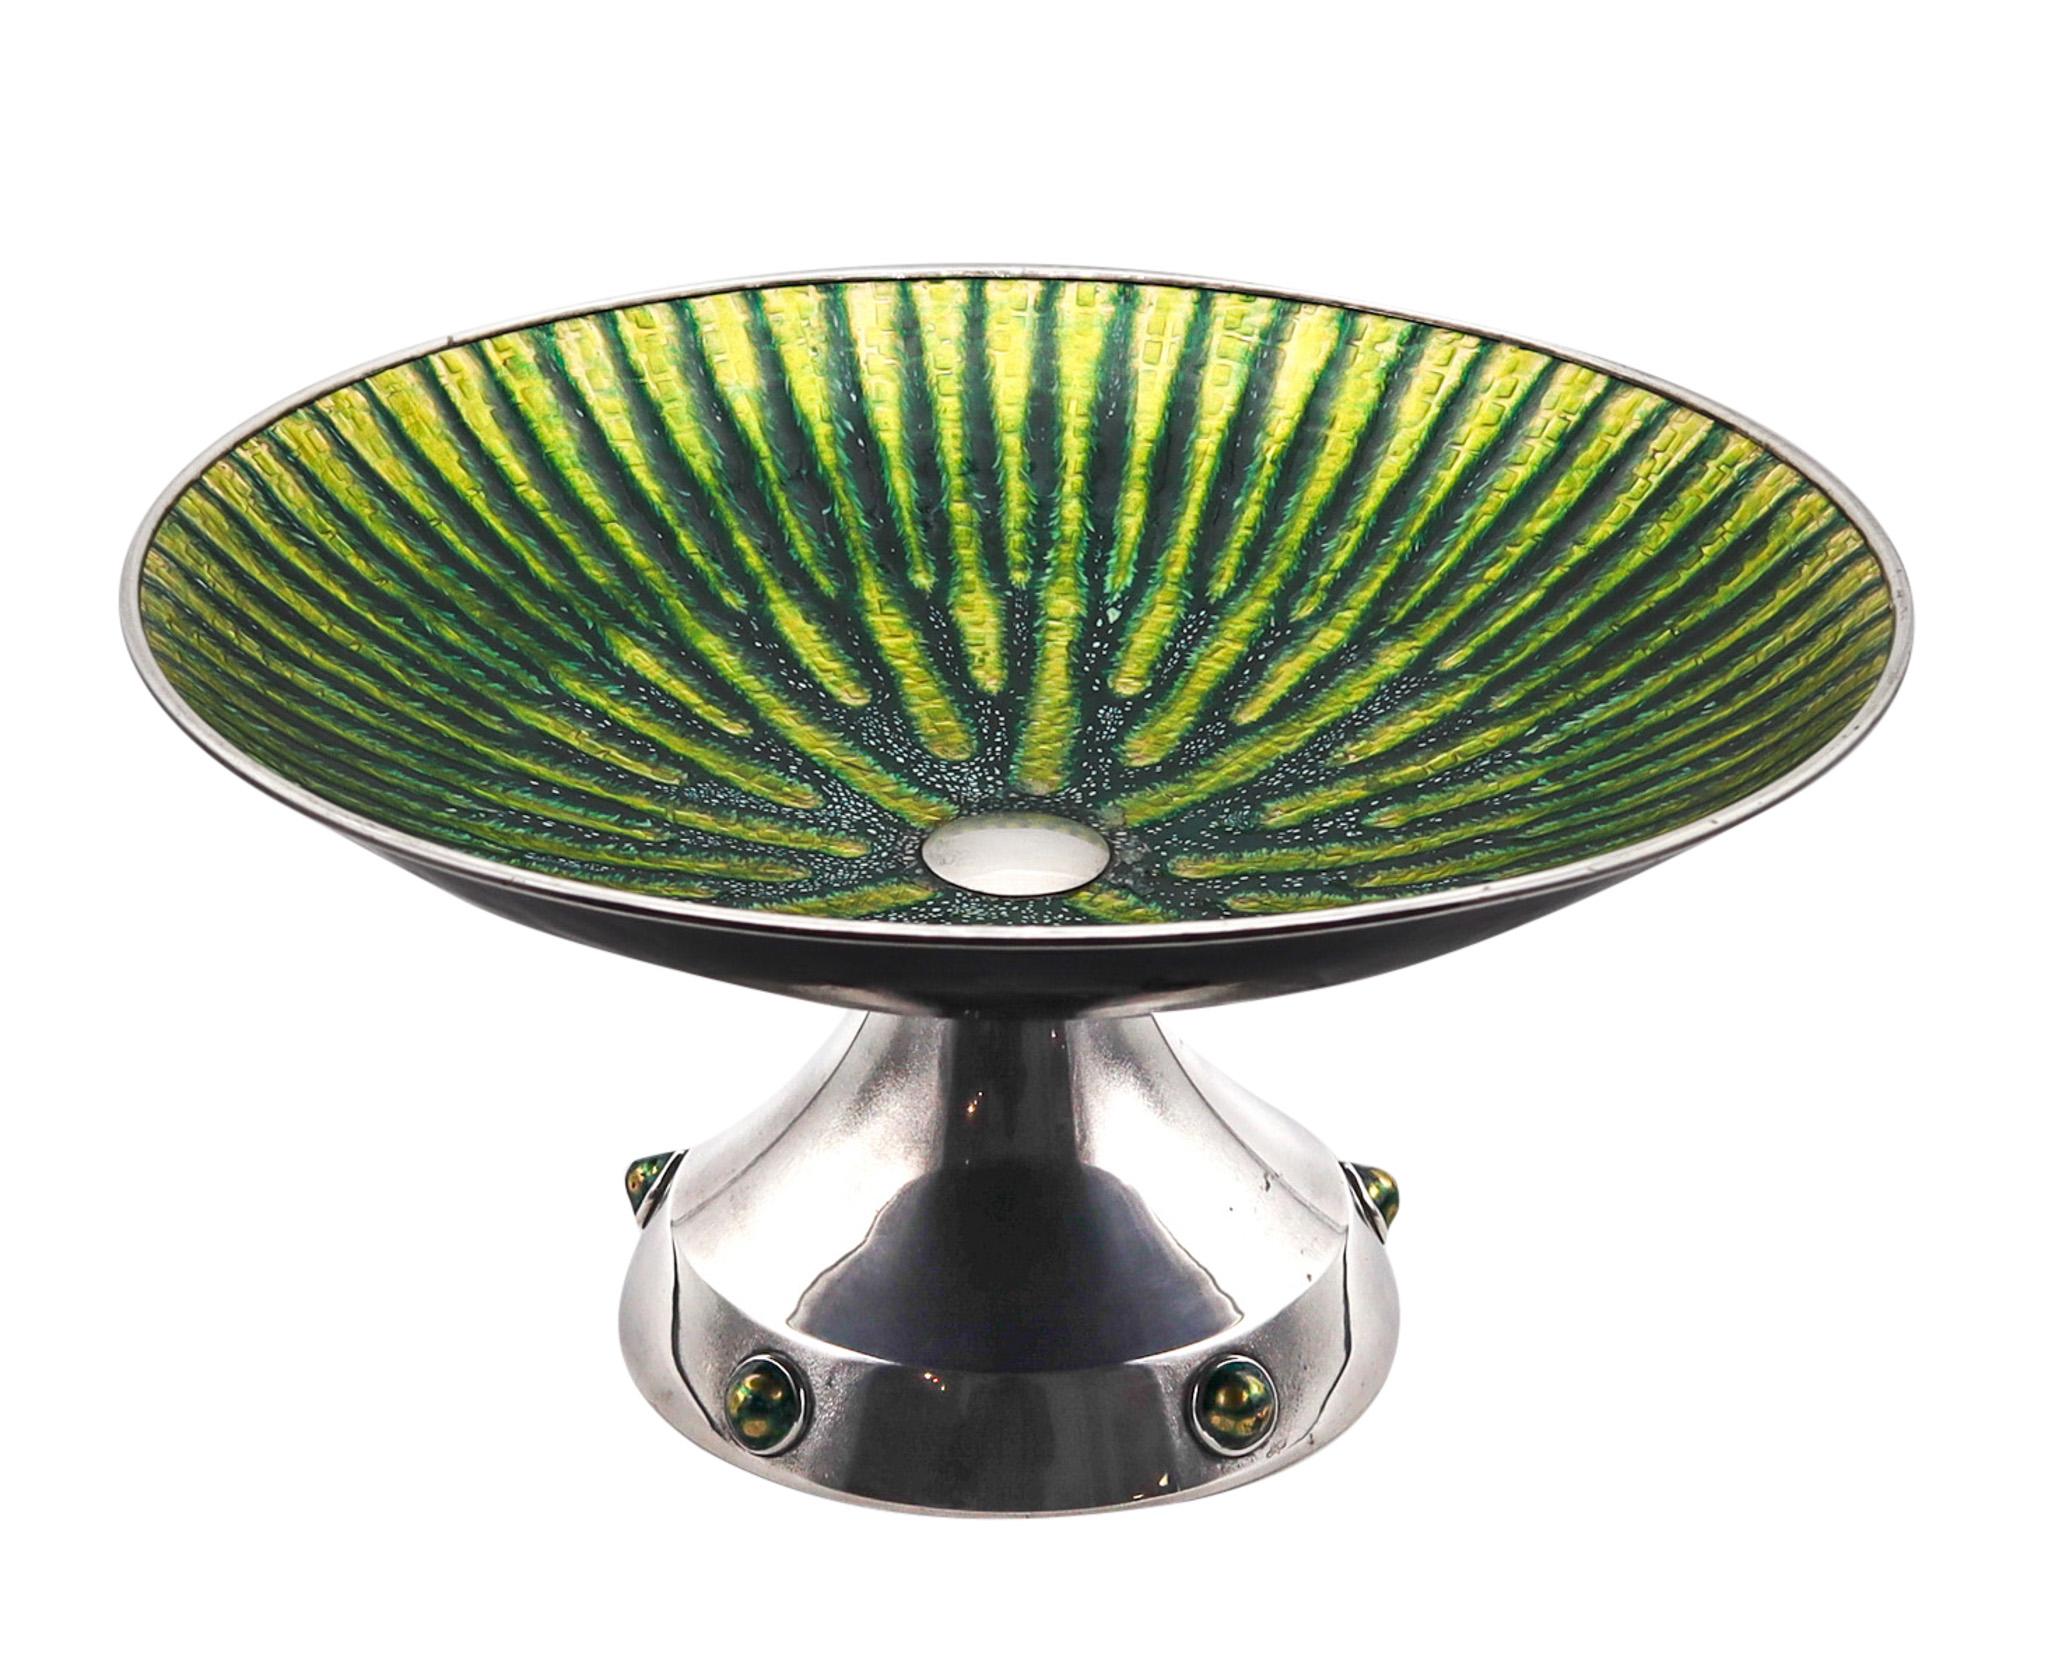 Enameled center piece made in Barcelona

An extraordinary piece of Spanish silversmith, created in the city of Barcelona during the post war mid century period, in the 1950. This oversized massive center piece display very well and has been